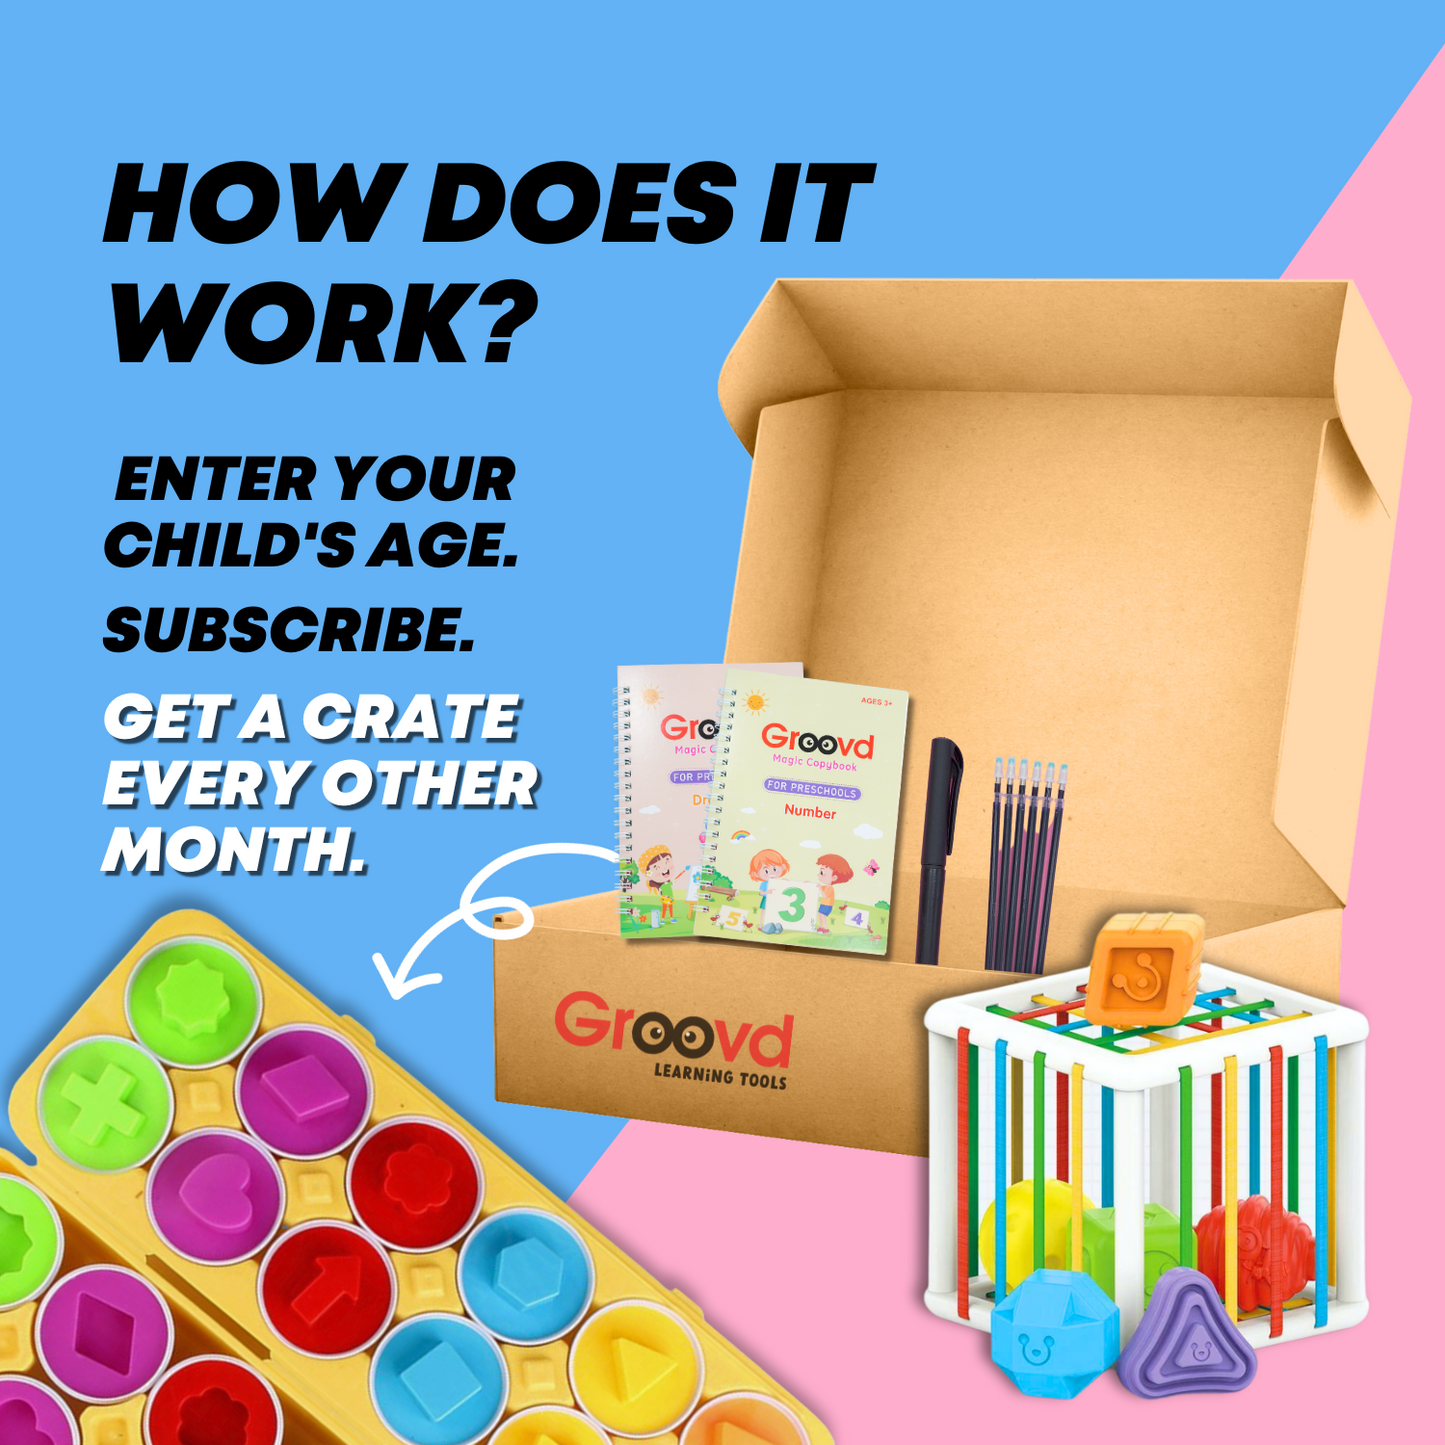 The Groovd Ultimate Learning Box Subscription